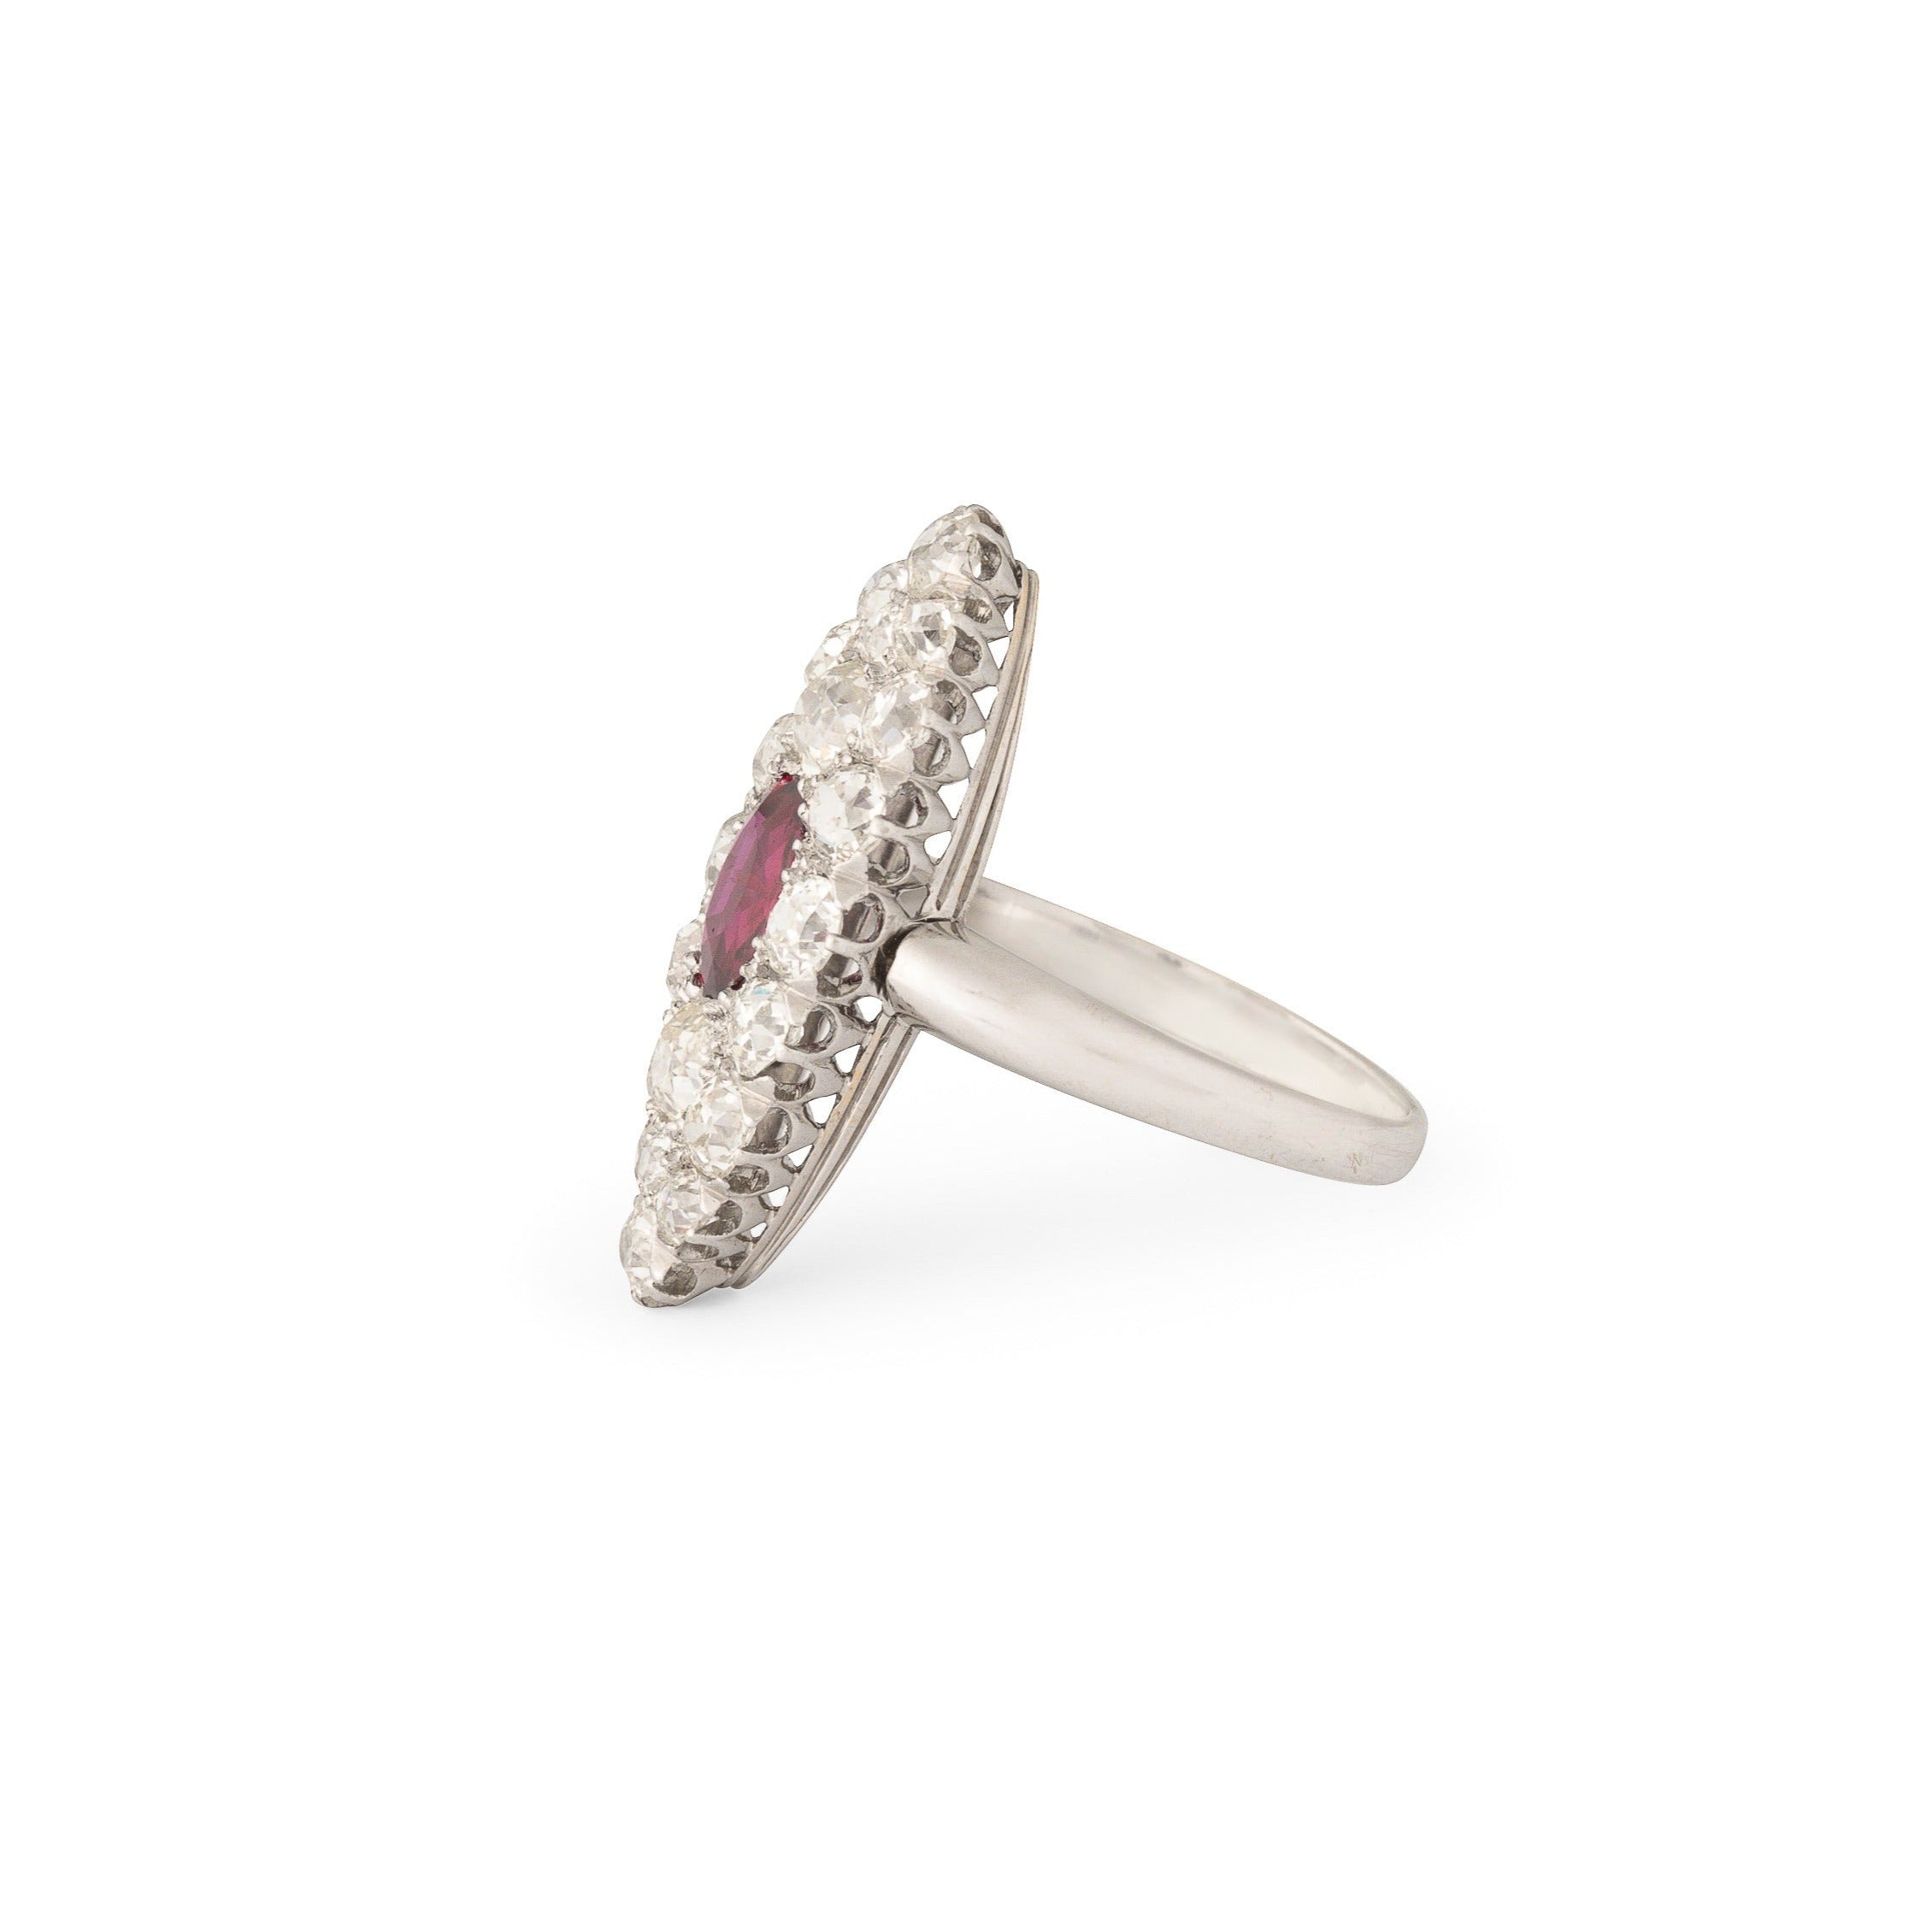 Old Mine Cut Diamond, Ruby, and 14K Gold Navette Ring